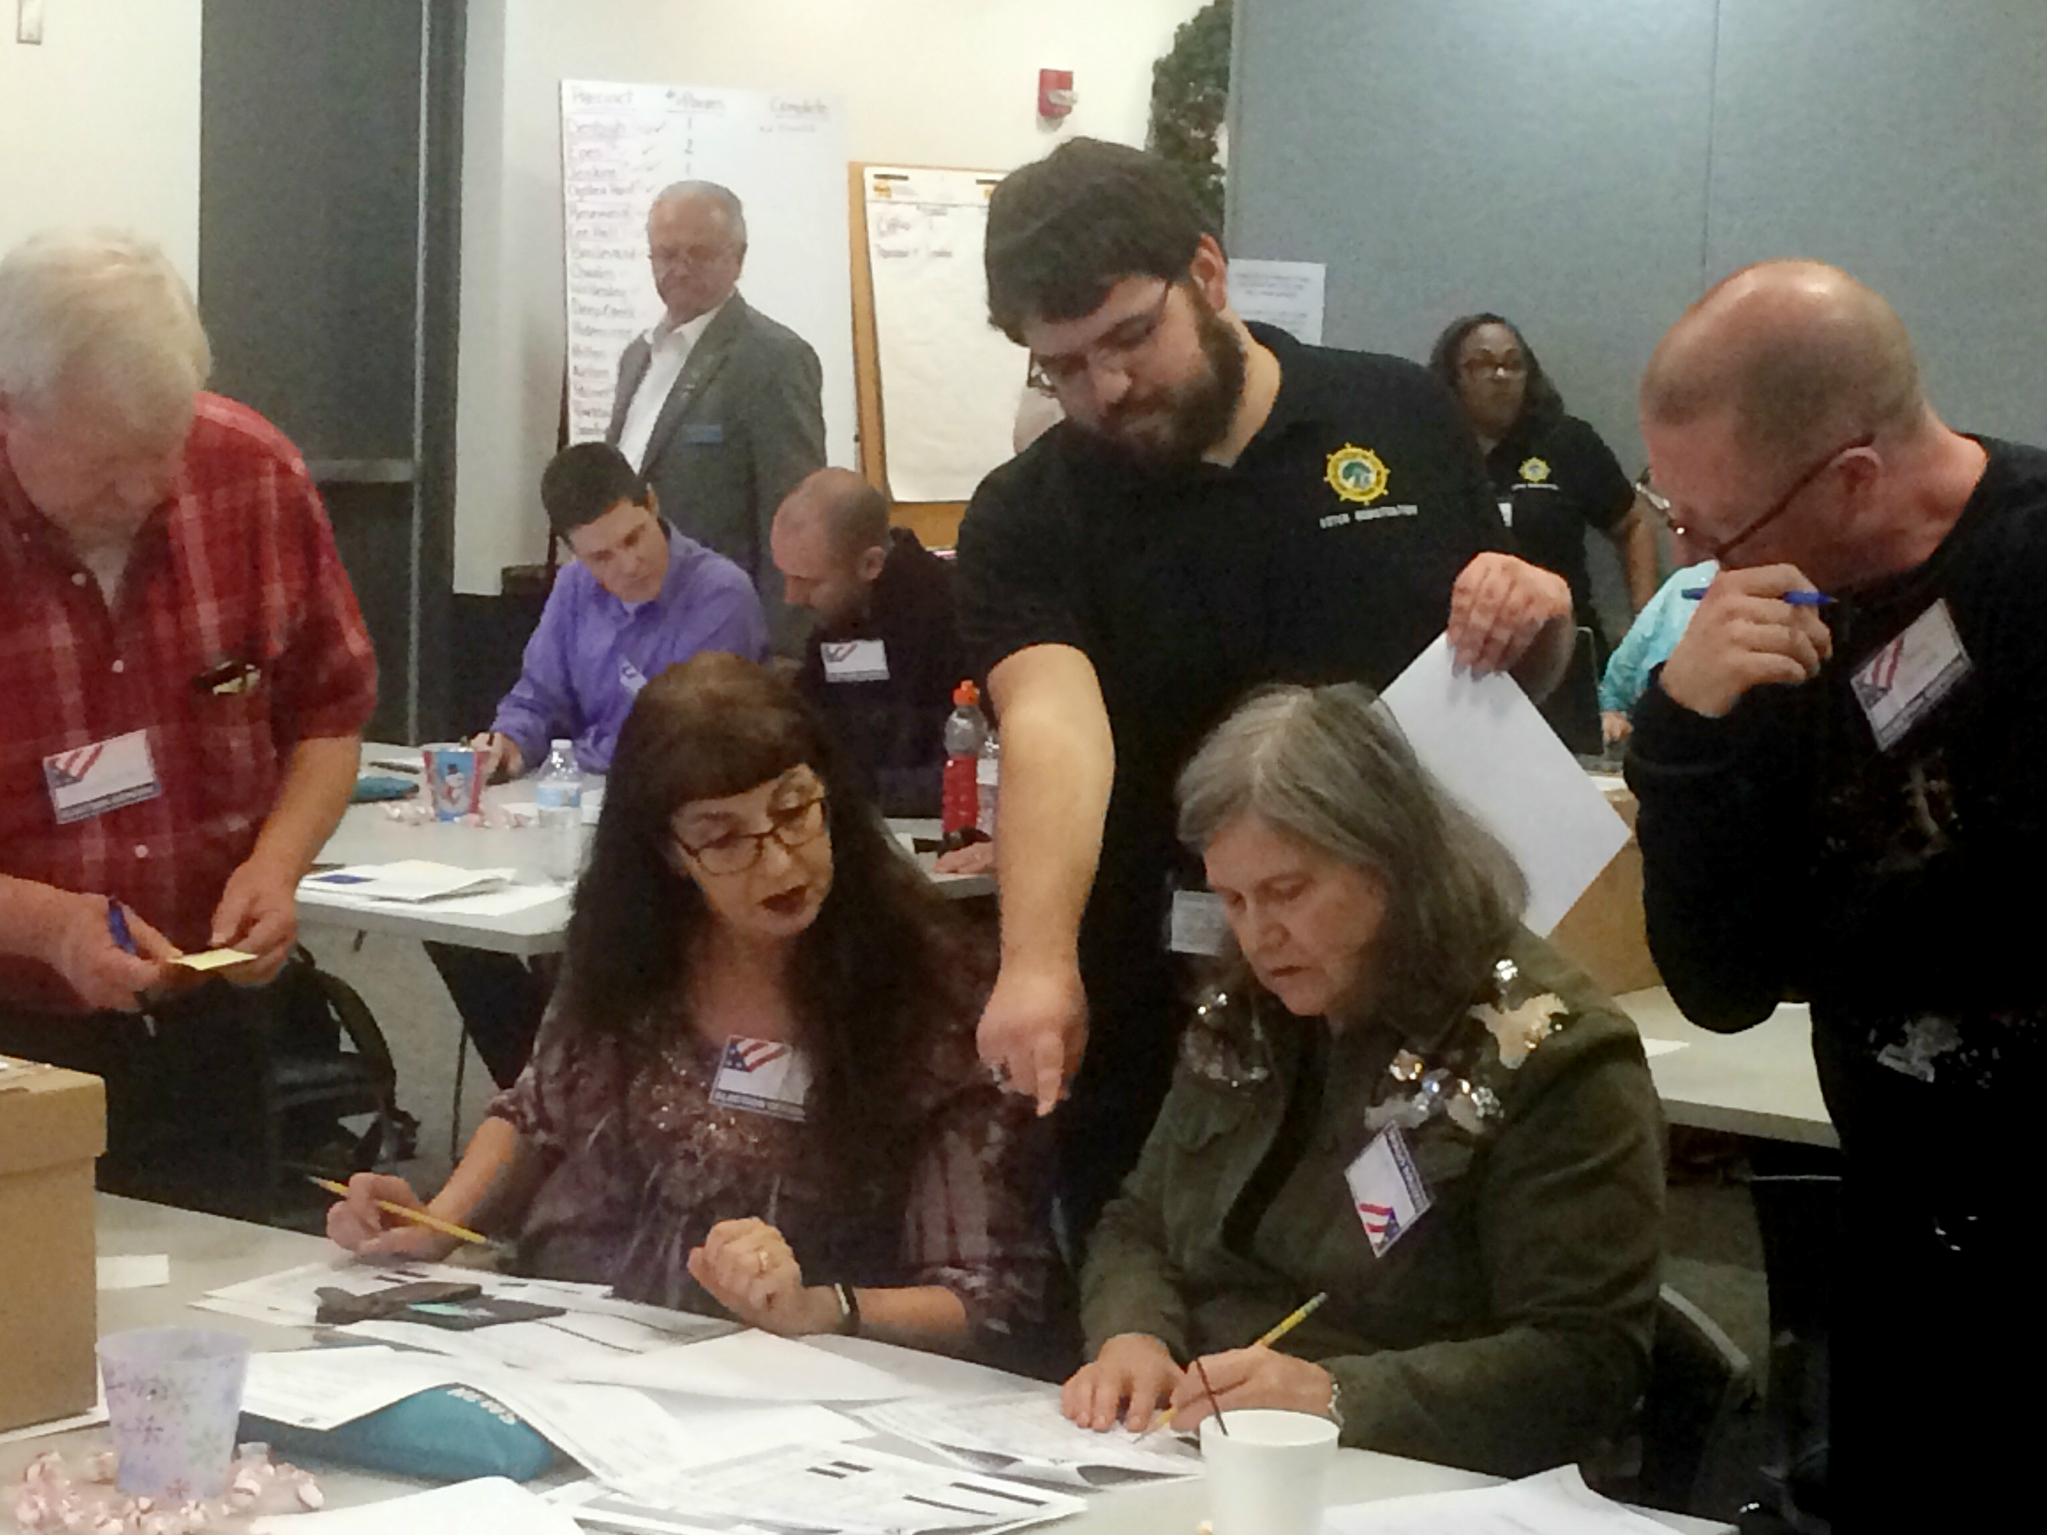 Election officials in Newport News, Virginia examine ballots that a computer failed to scan during a recount for a House of Delegates race on 19 December 2017.